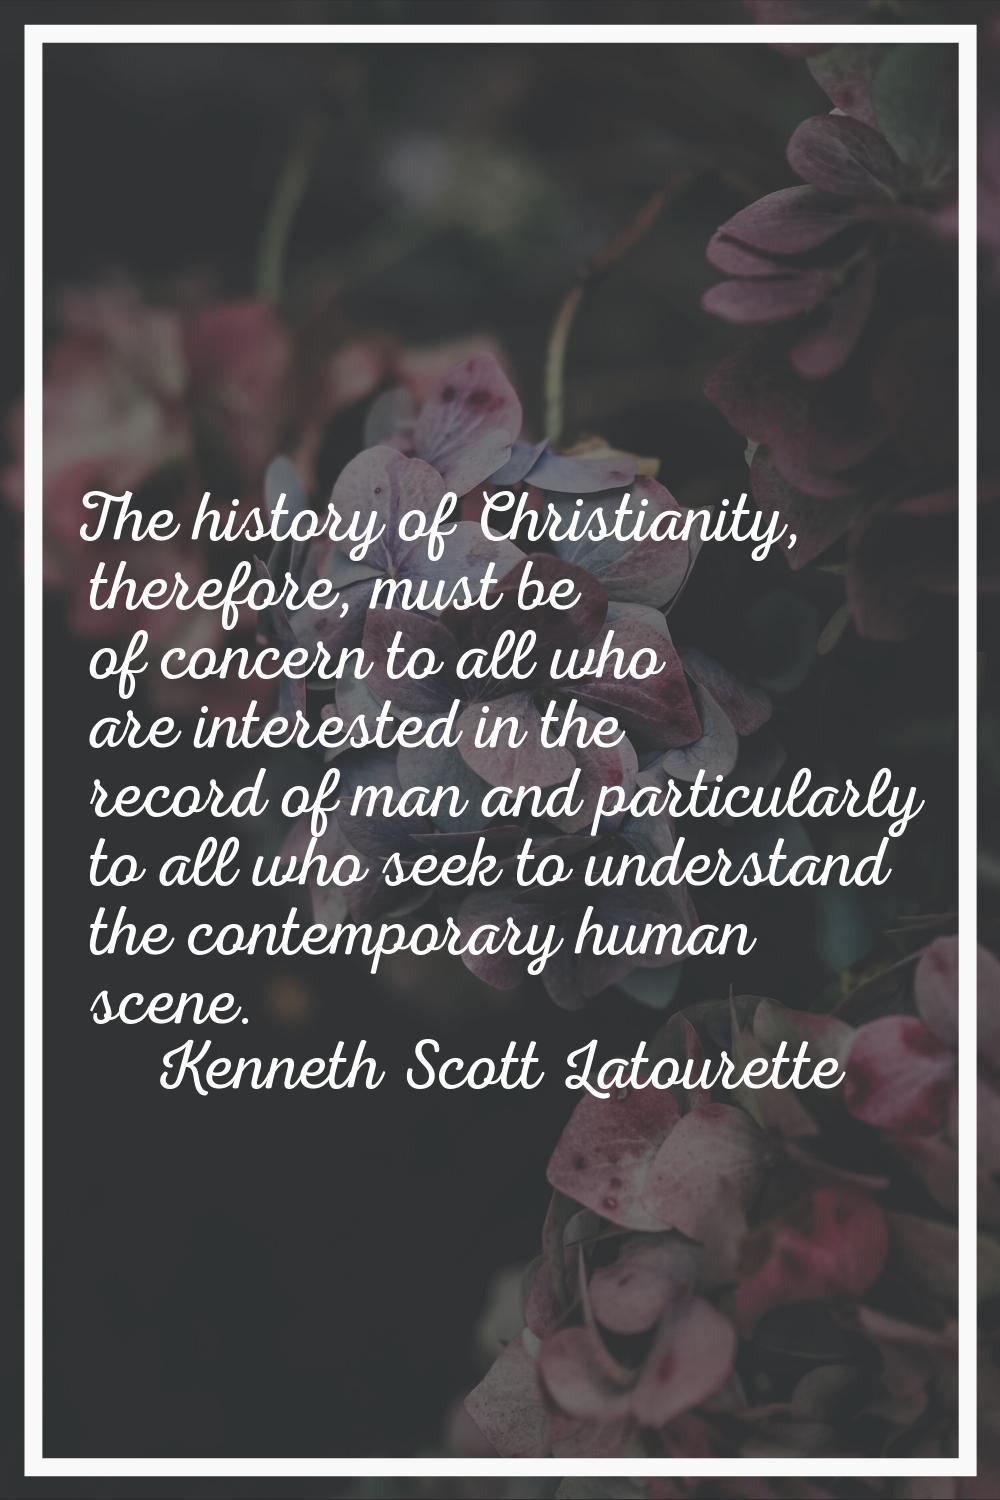 The history of Christianity, therefore, must be of concern to all who are interested in the record 